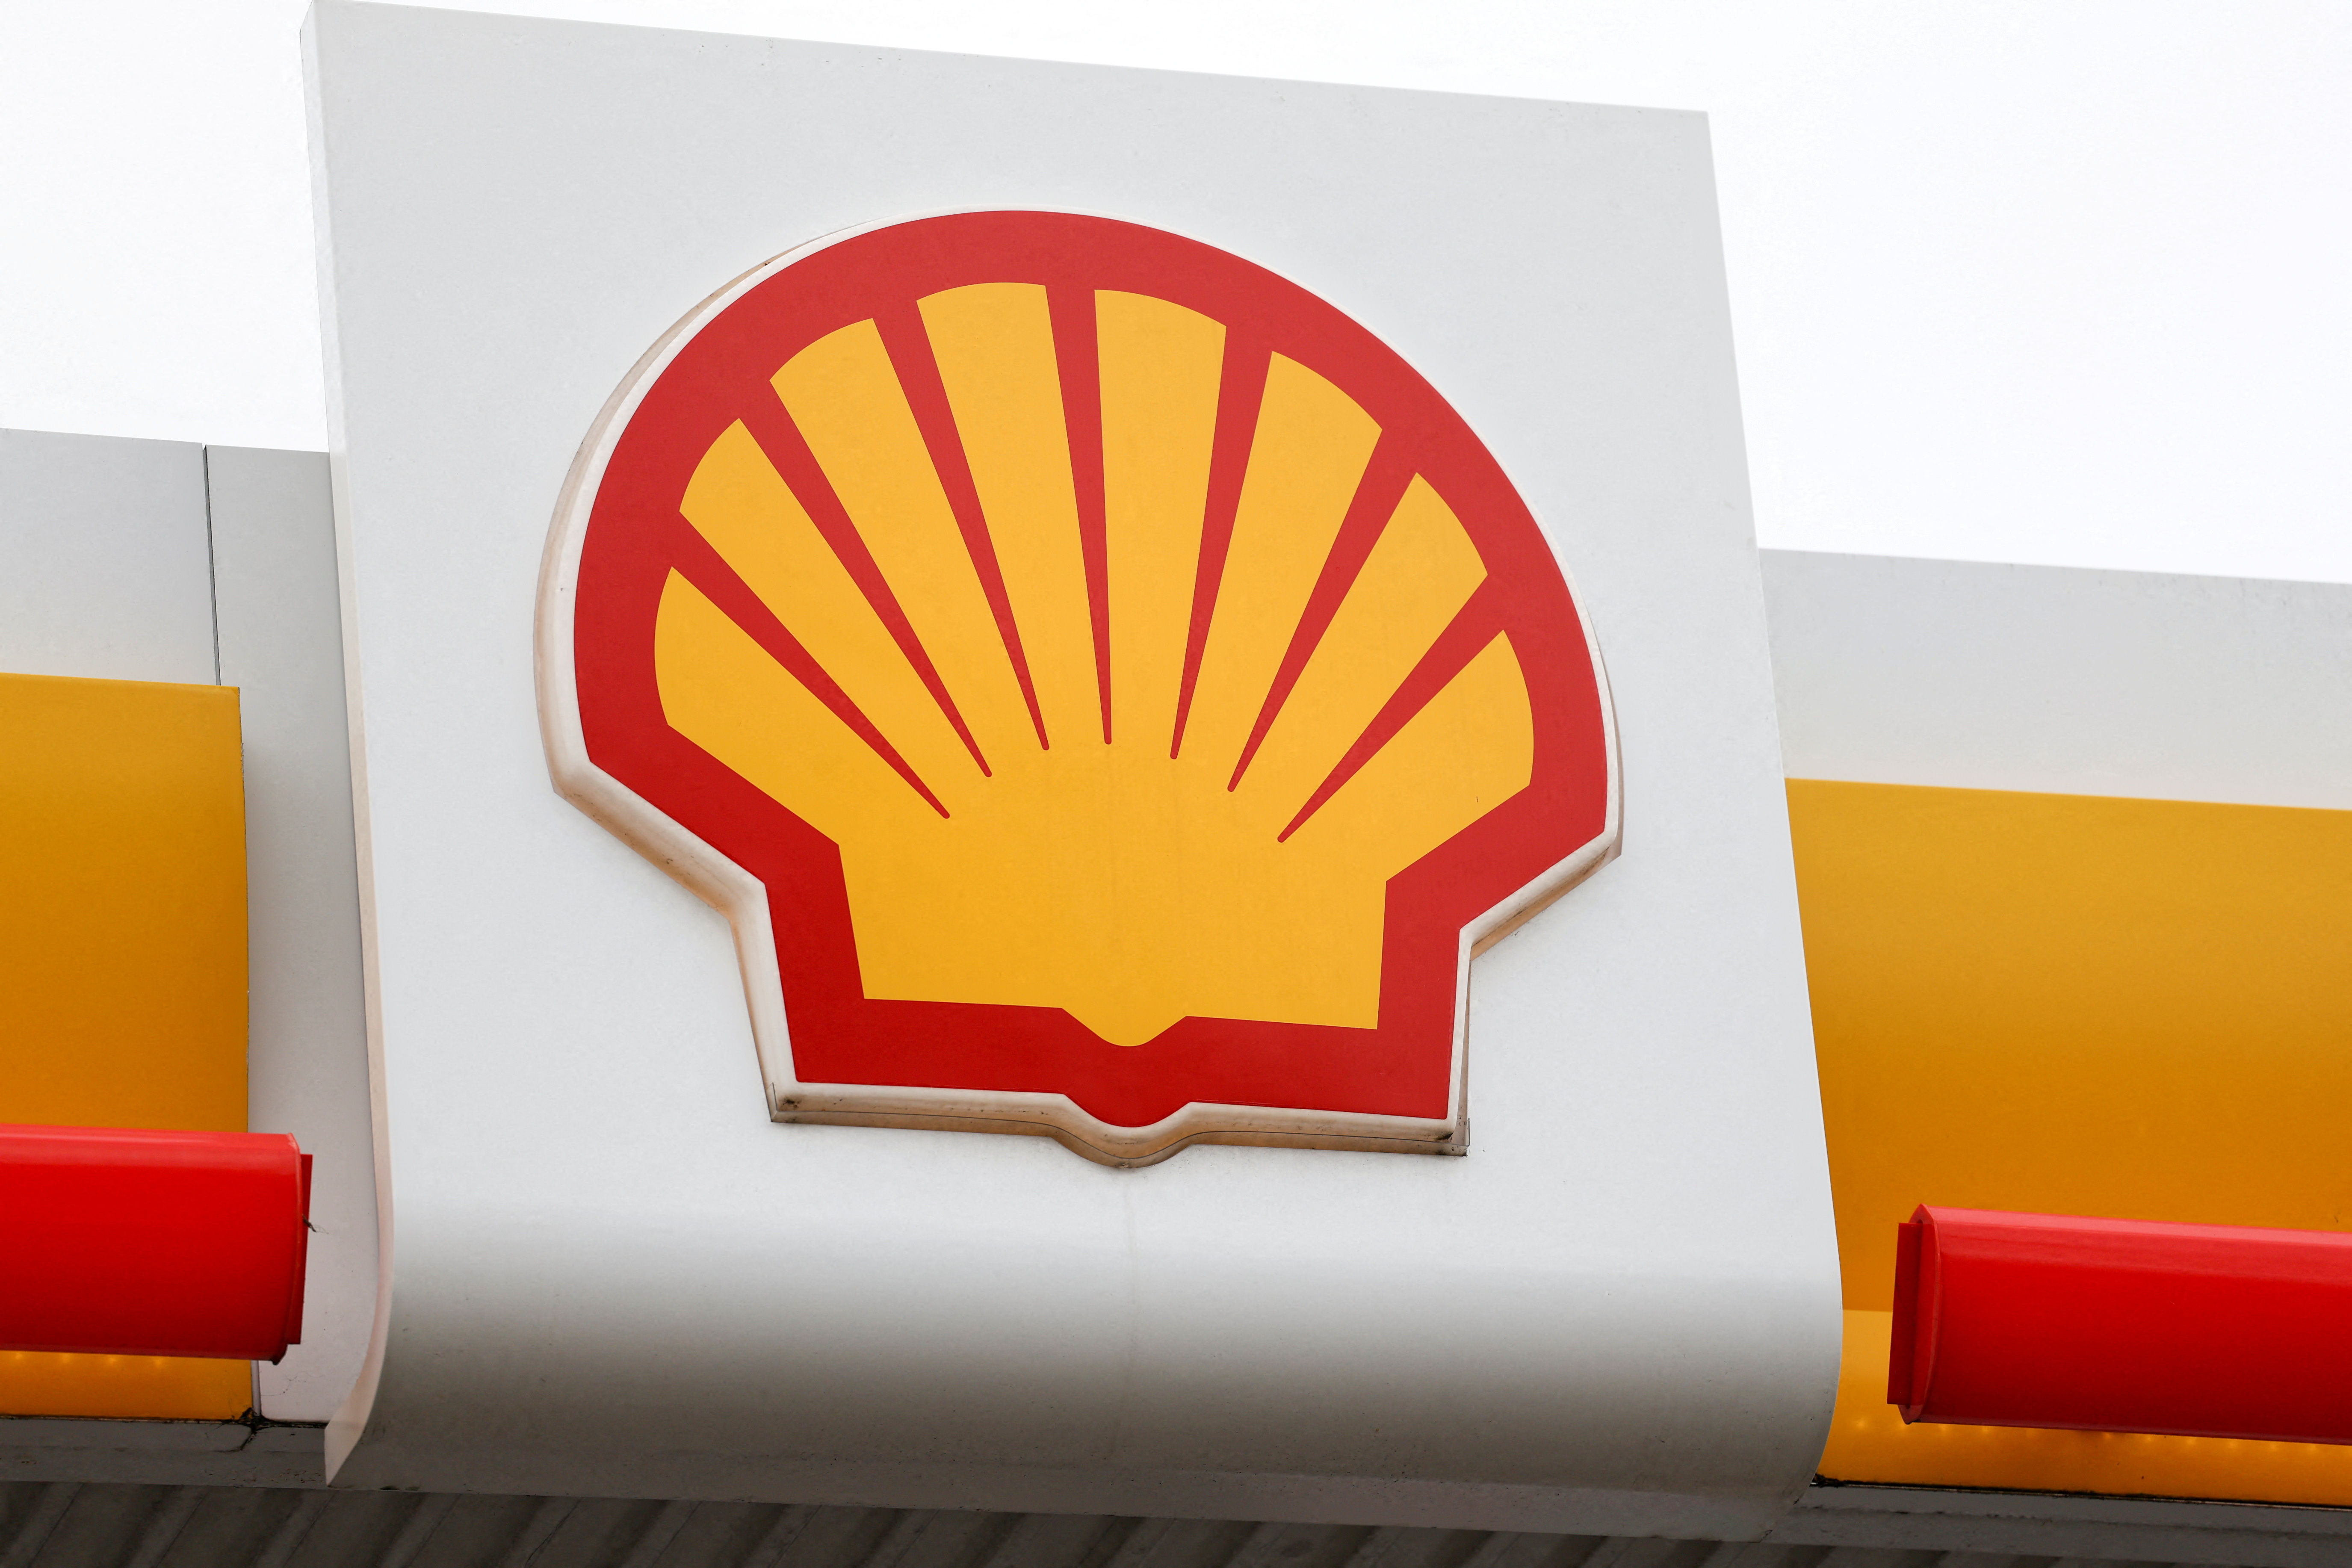 View showing the logo of a Shell petrol station in south-east London